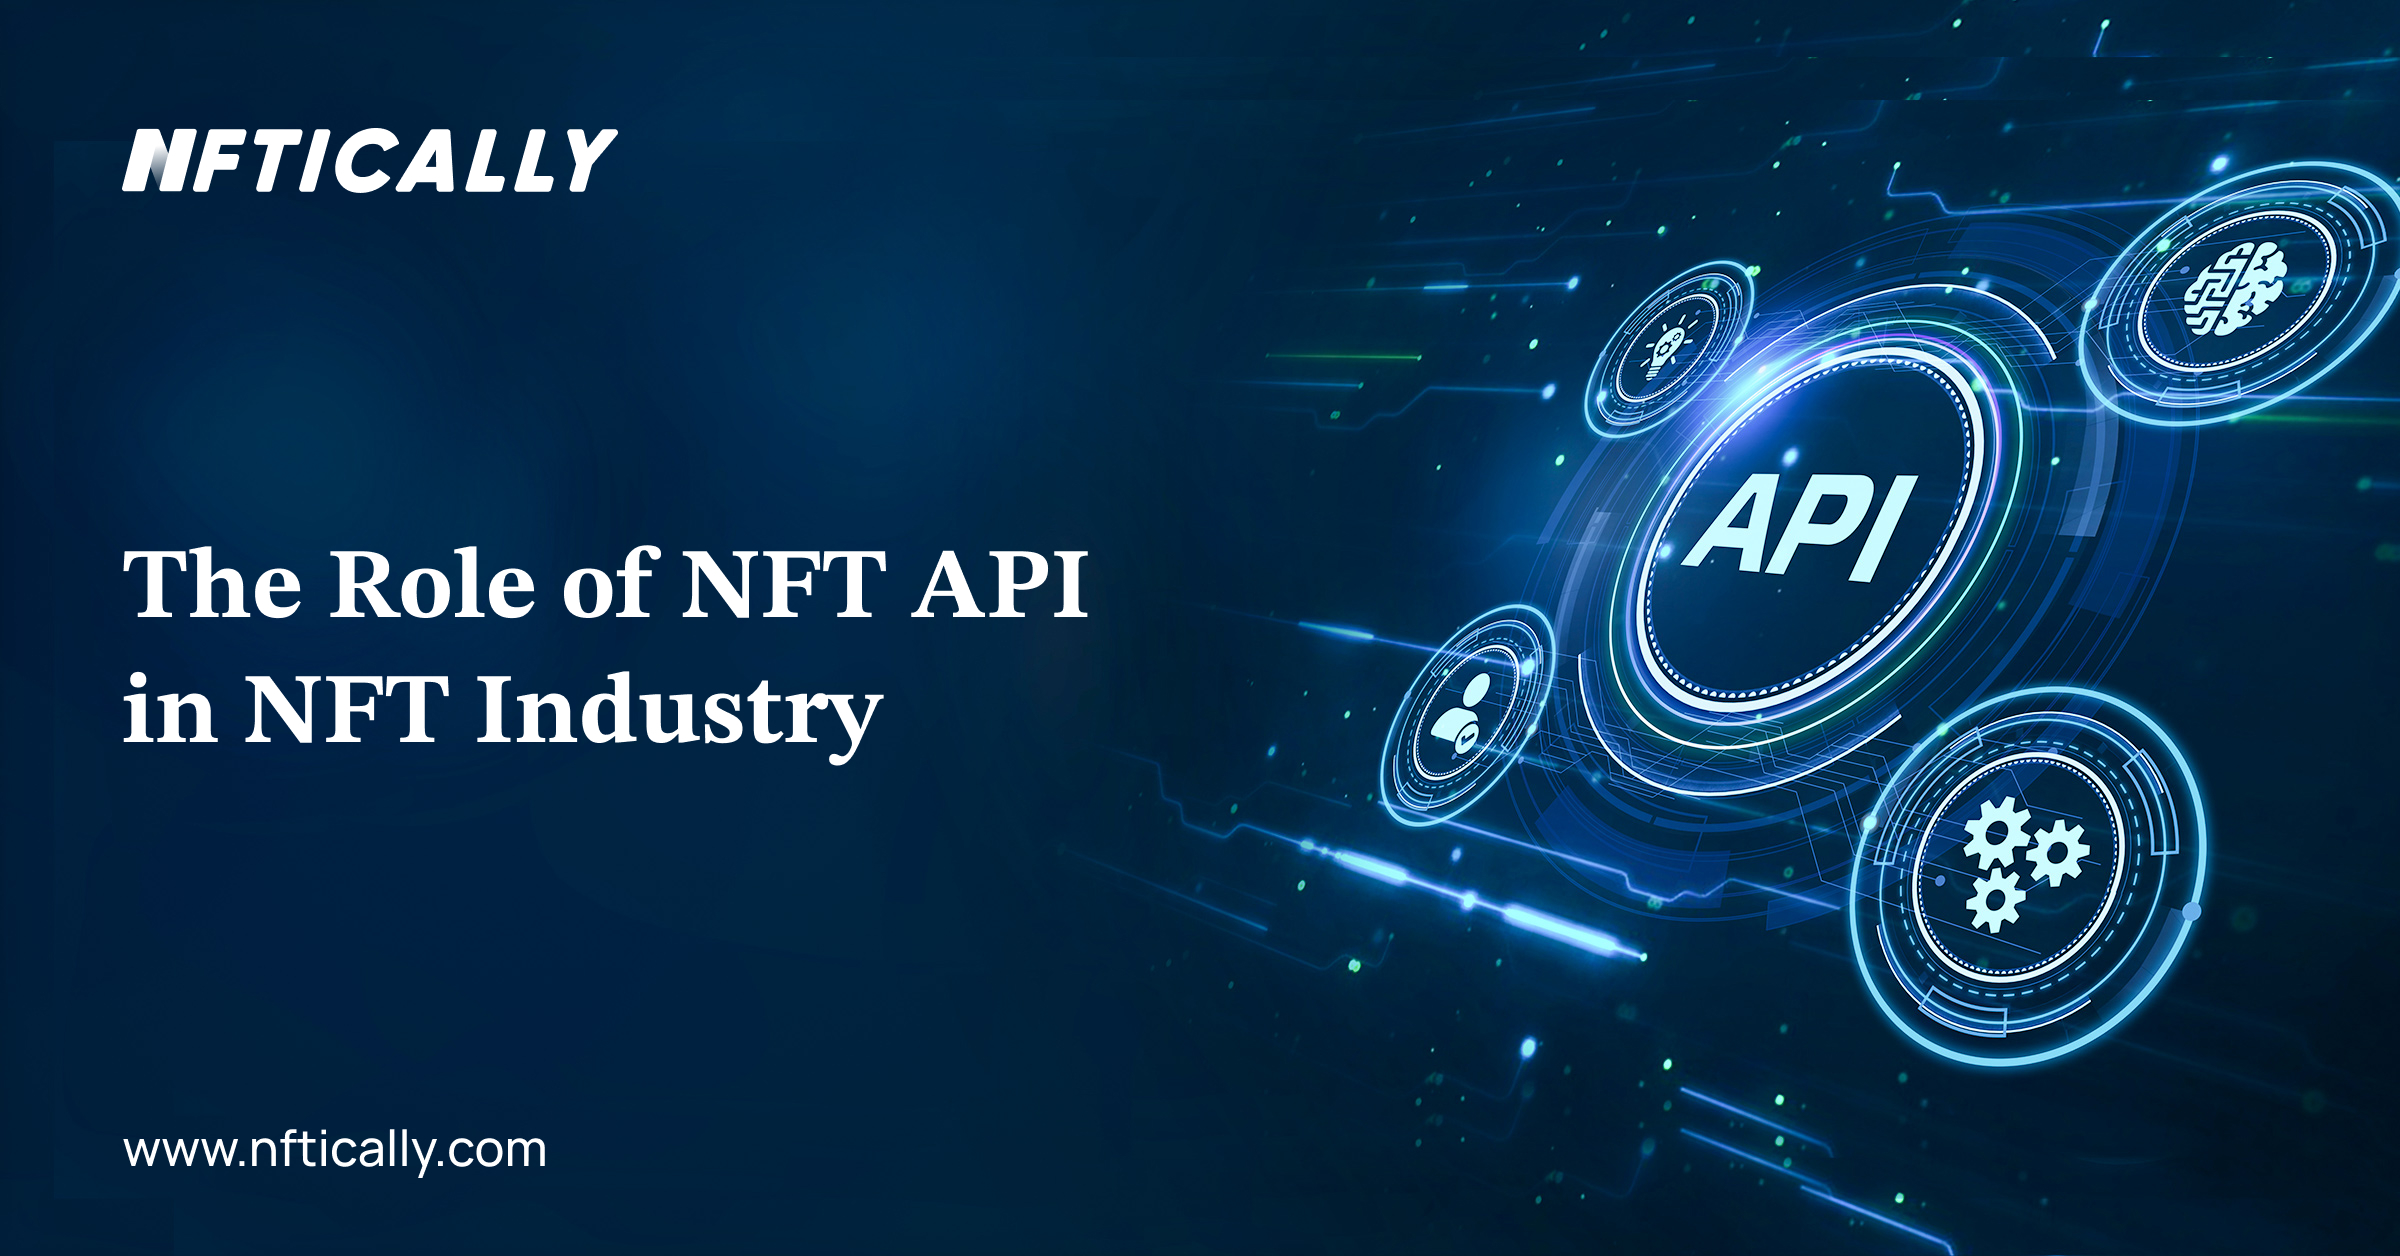 The Role of NFT API in NFT Industry